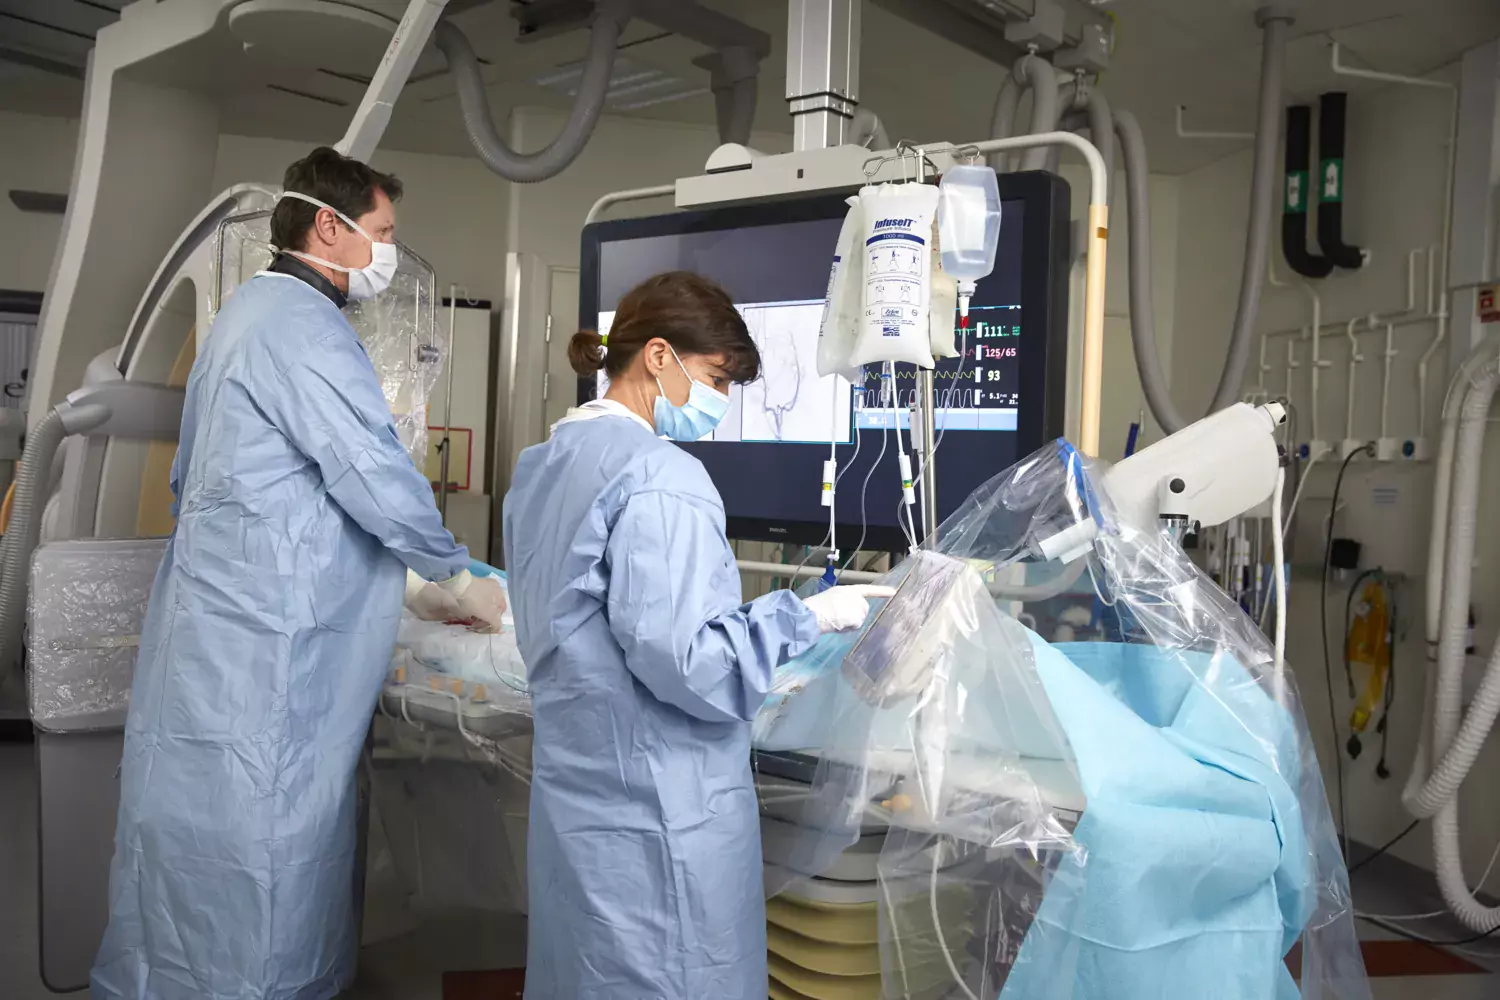 Two people in surgical clothes and equipment in the operating theatre. They work and have their backs to the camera.